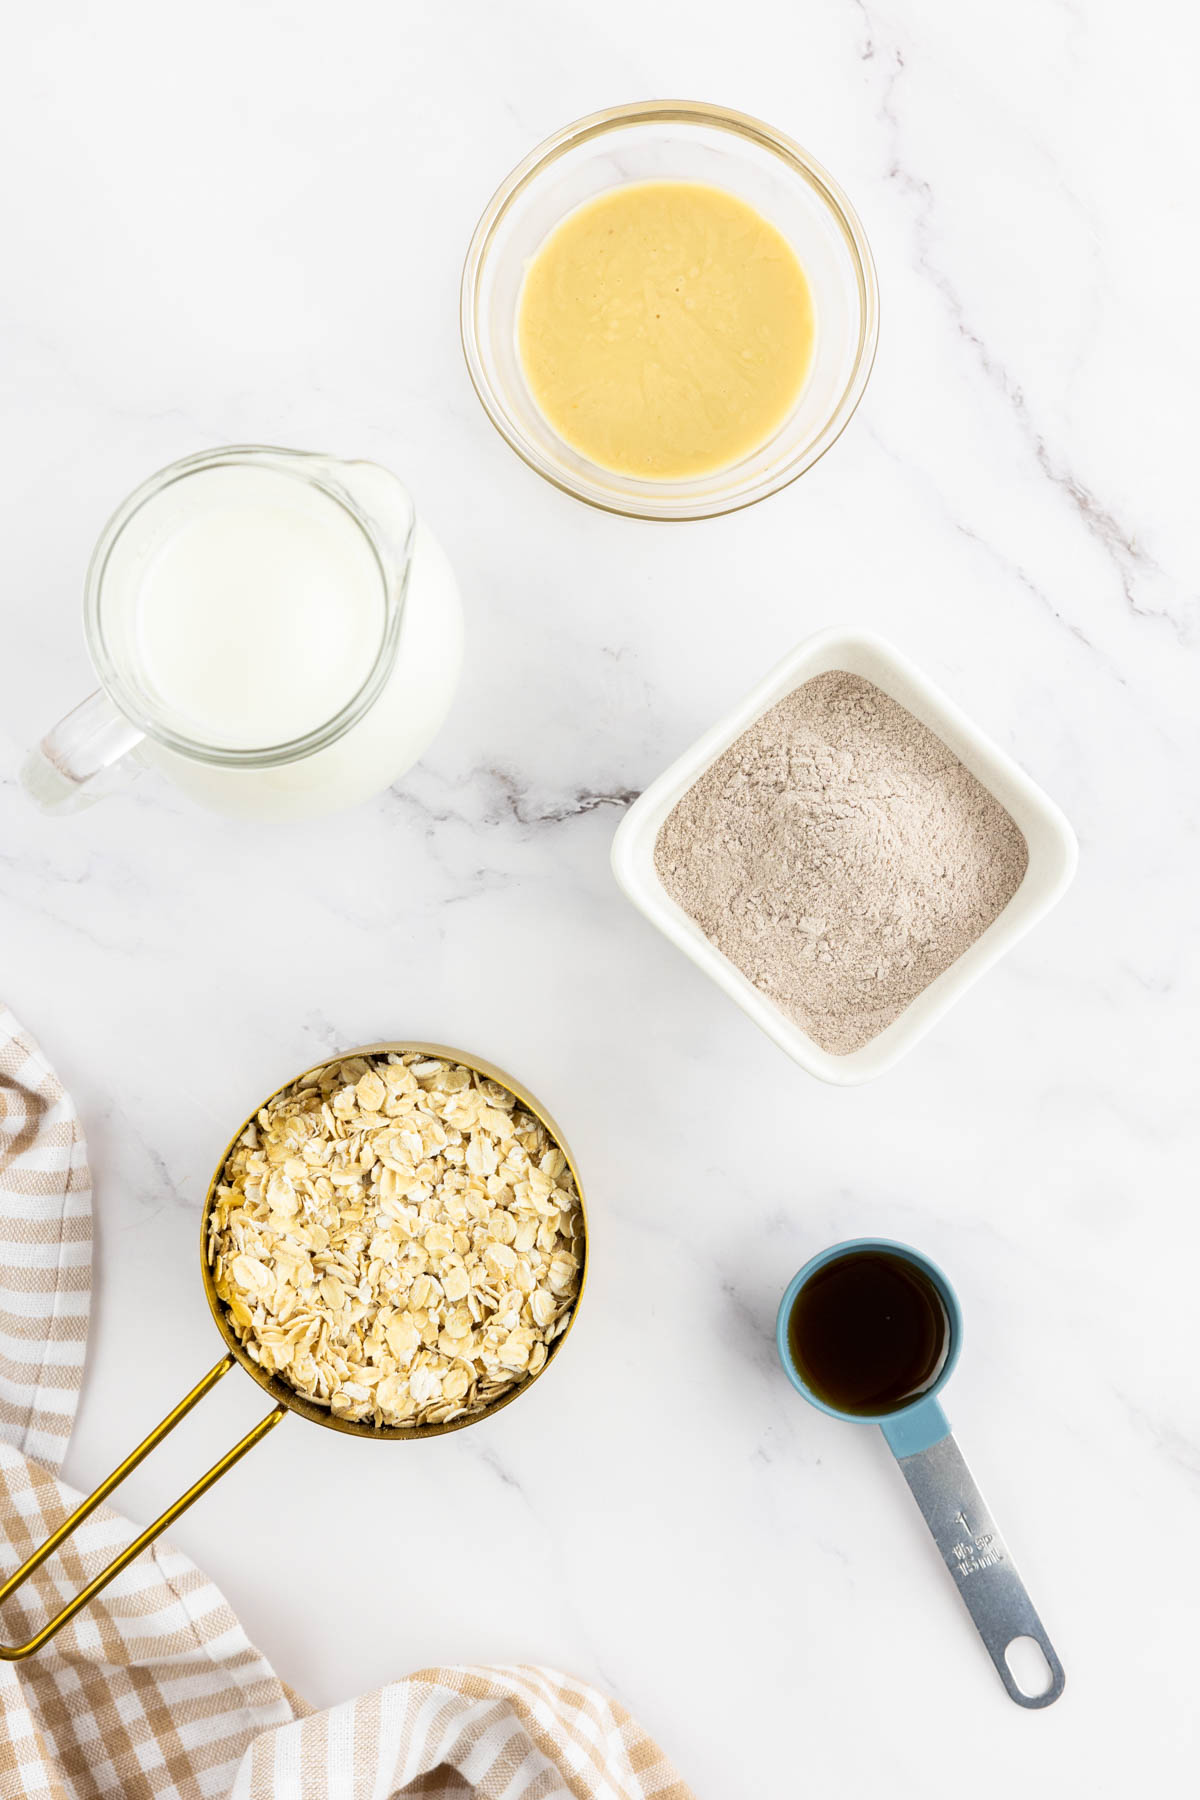 Ingredients for the high calorie oatmeal portioned  and on a kitchen counter